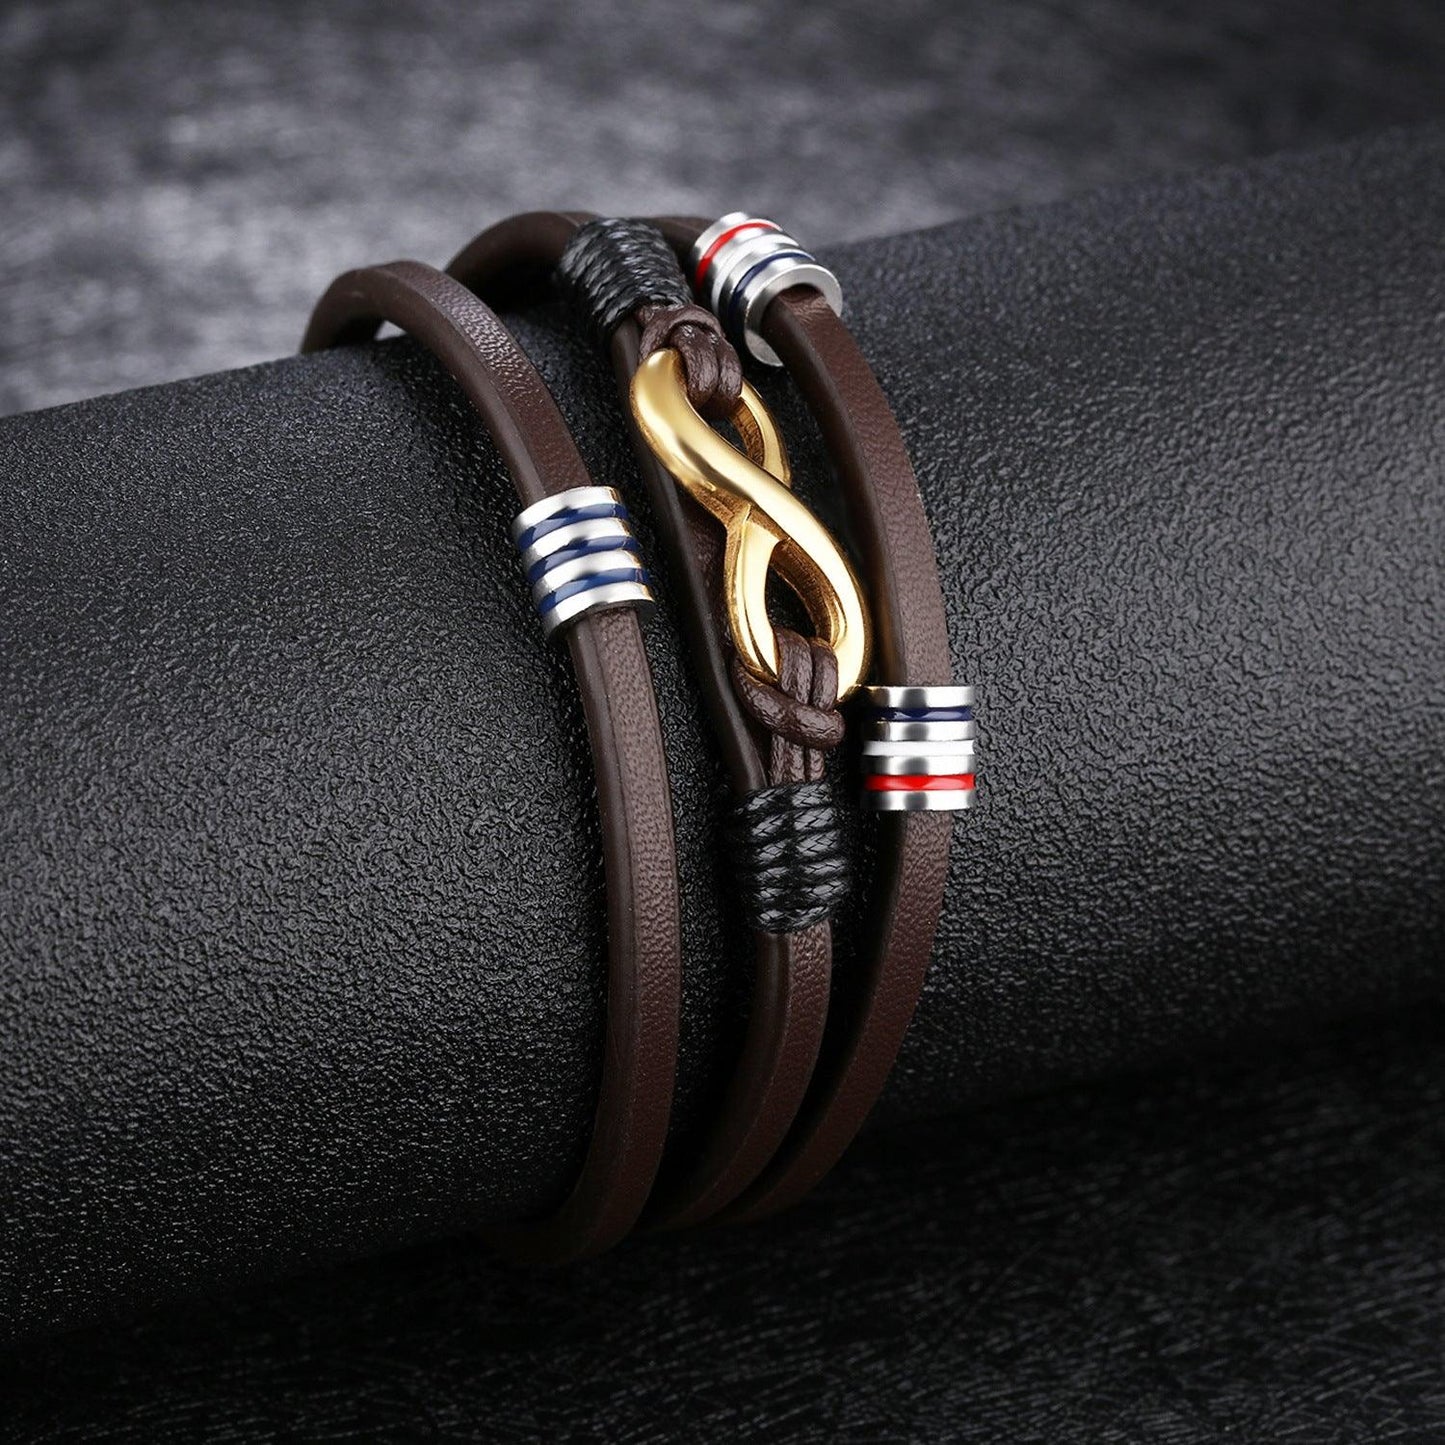 This Brown Leather Bracelet Adds an Effortless Touch of Style To Any Look - BUNNY BAZAR